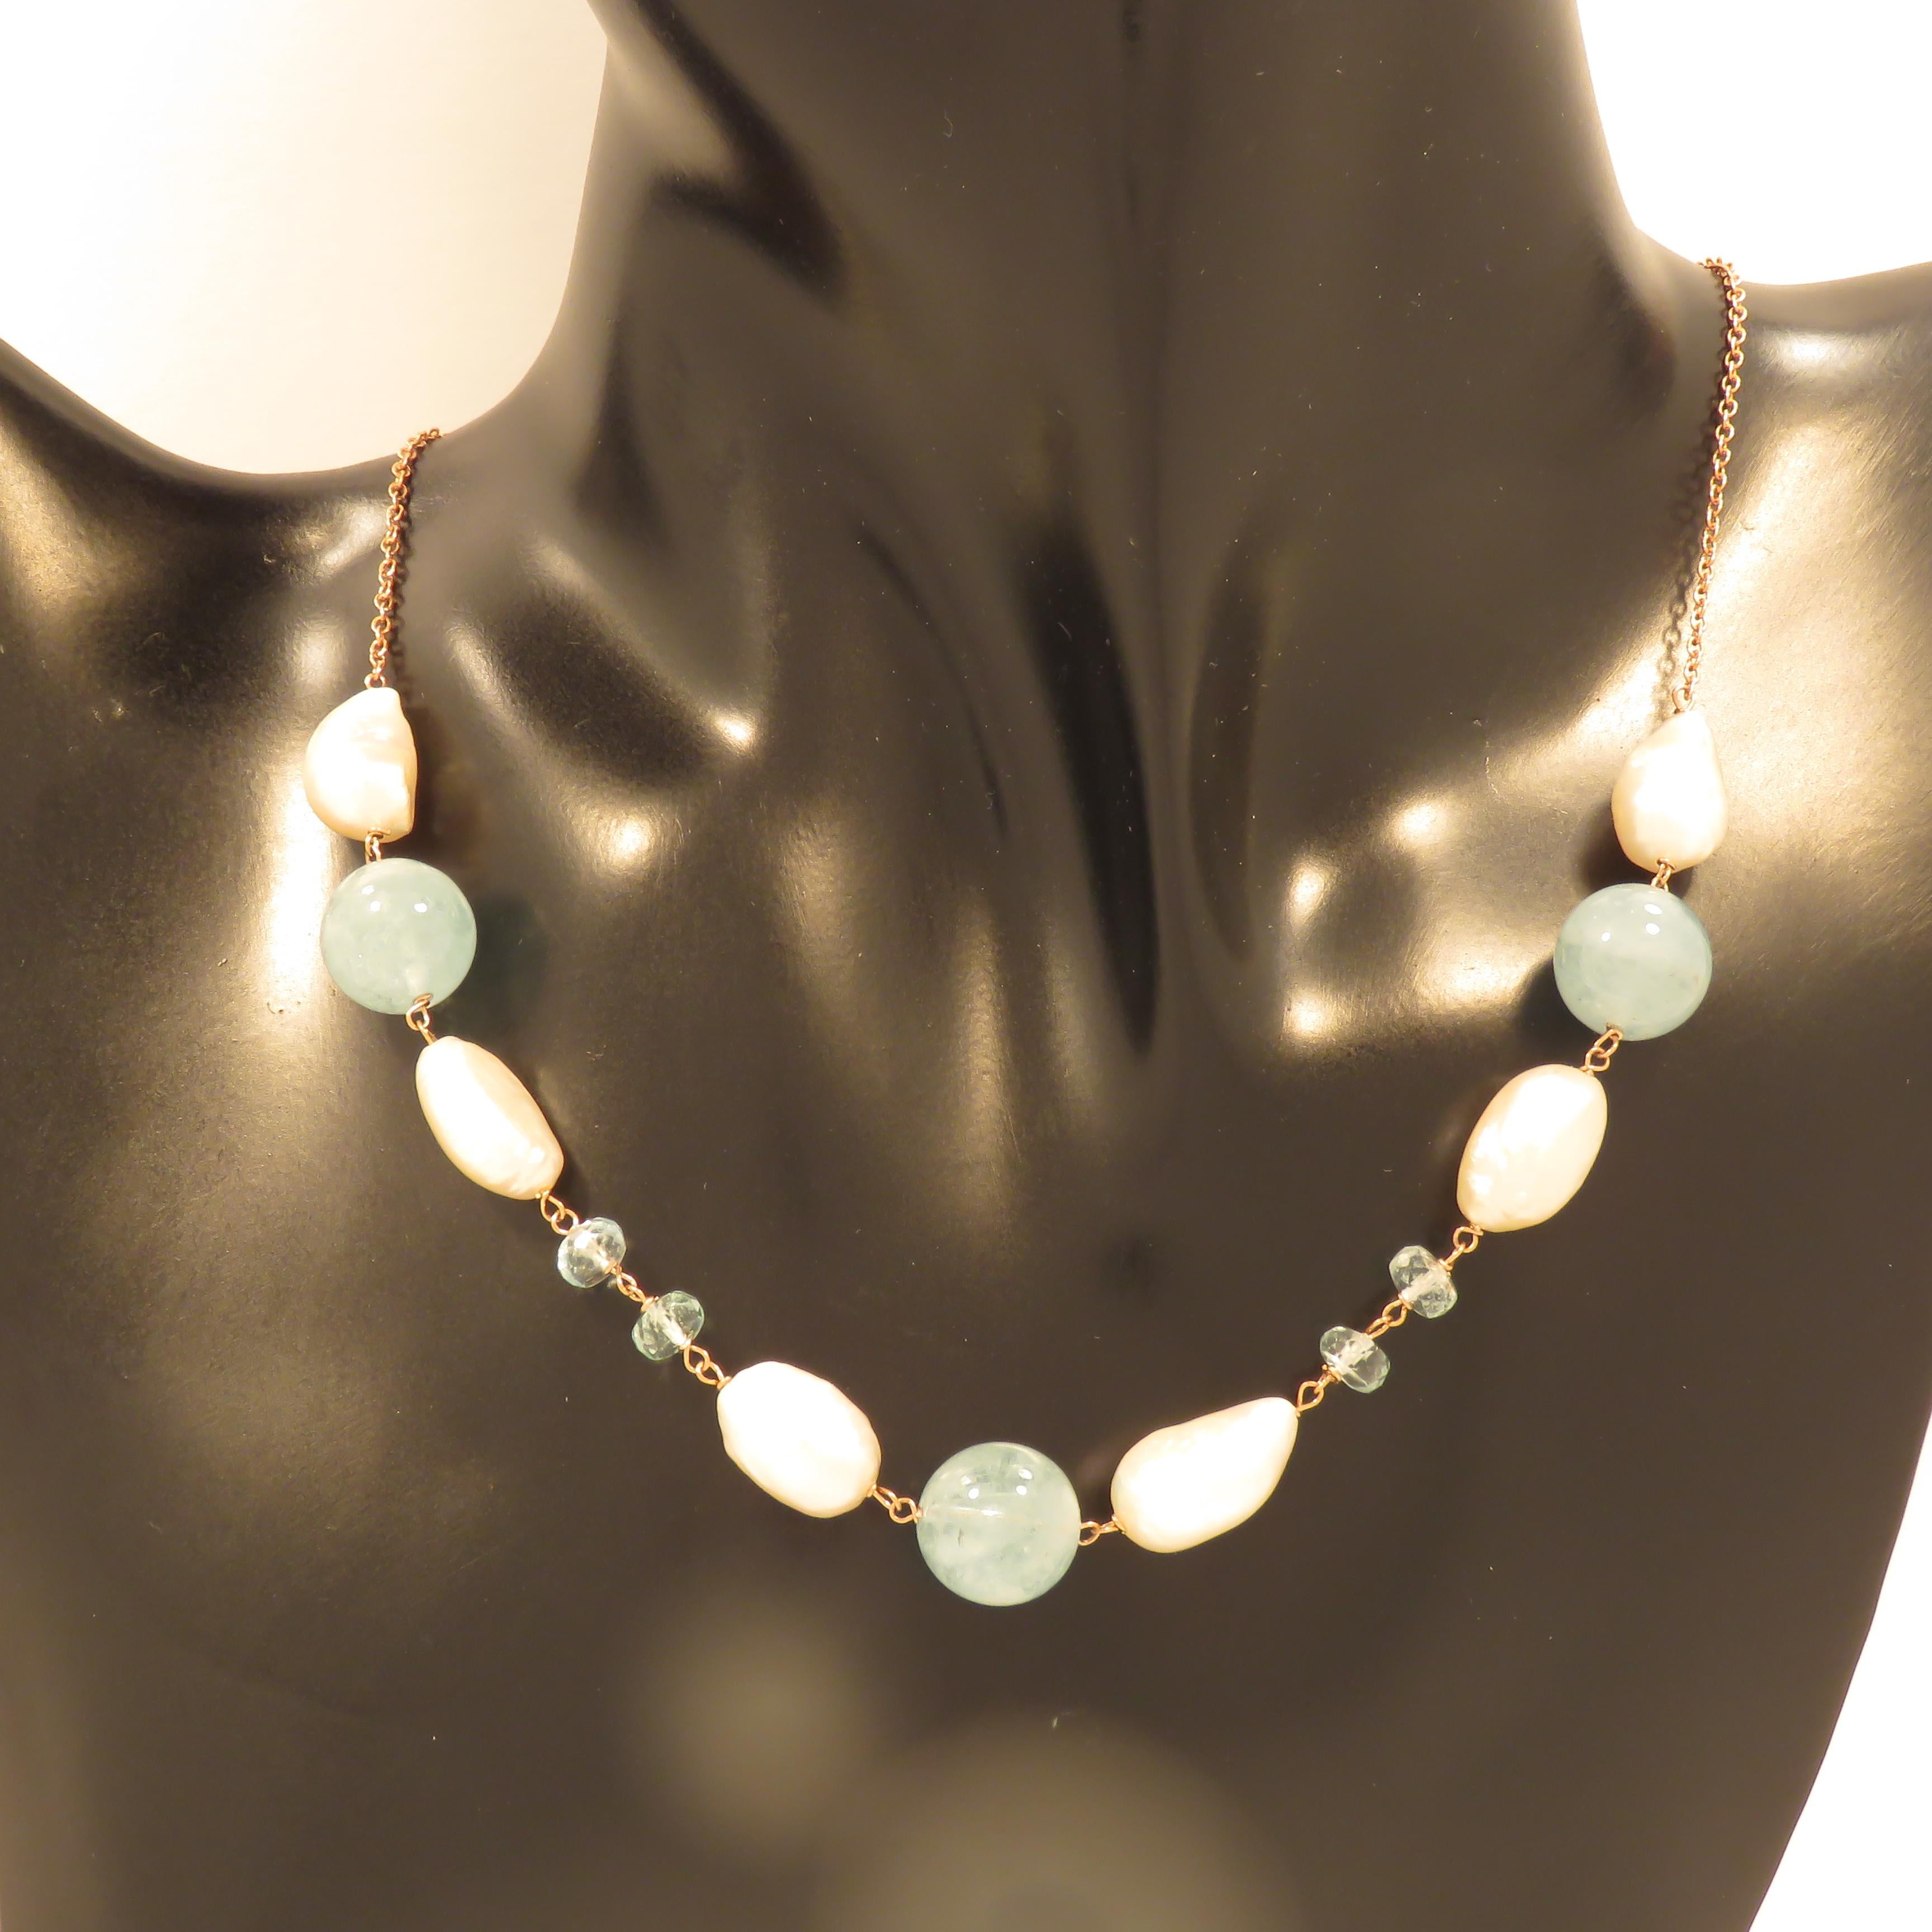 Beautiful necklace alternating genuine freshwater pearls and natural aquamarine with 9 karat rose gold rolo chain. The necklace length is adjustable from 430 mm to 470 mm / from 16.929 inches to 18.503 inches, it is possible to lengthen the necklace